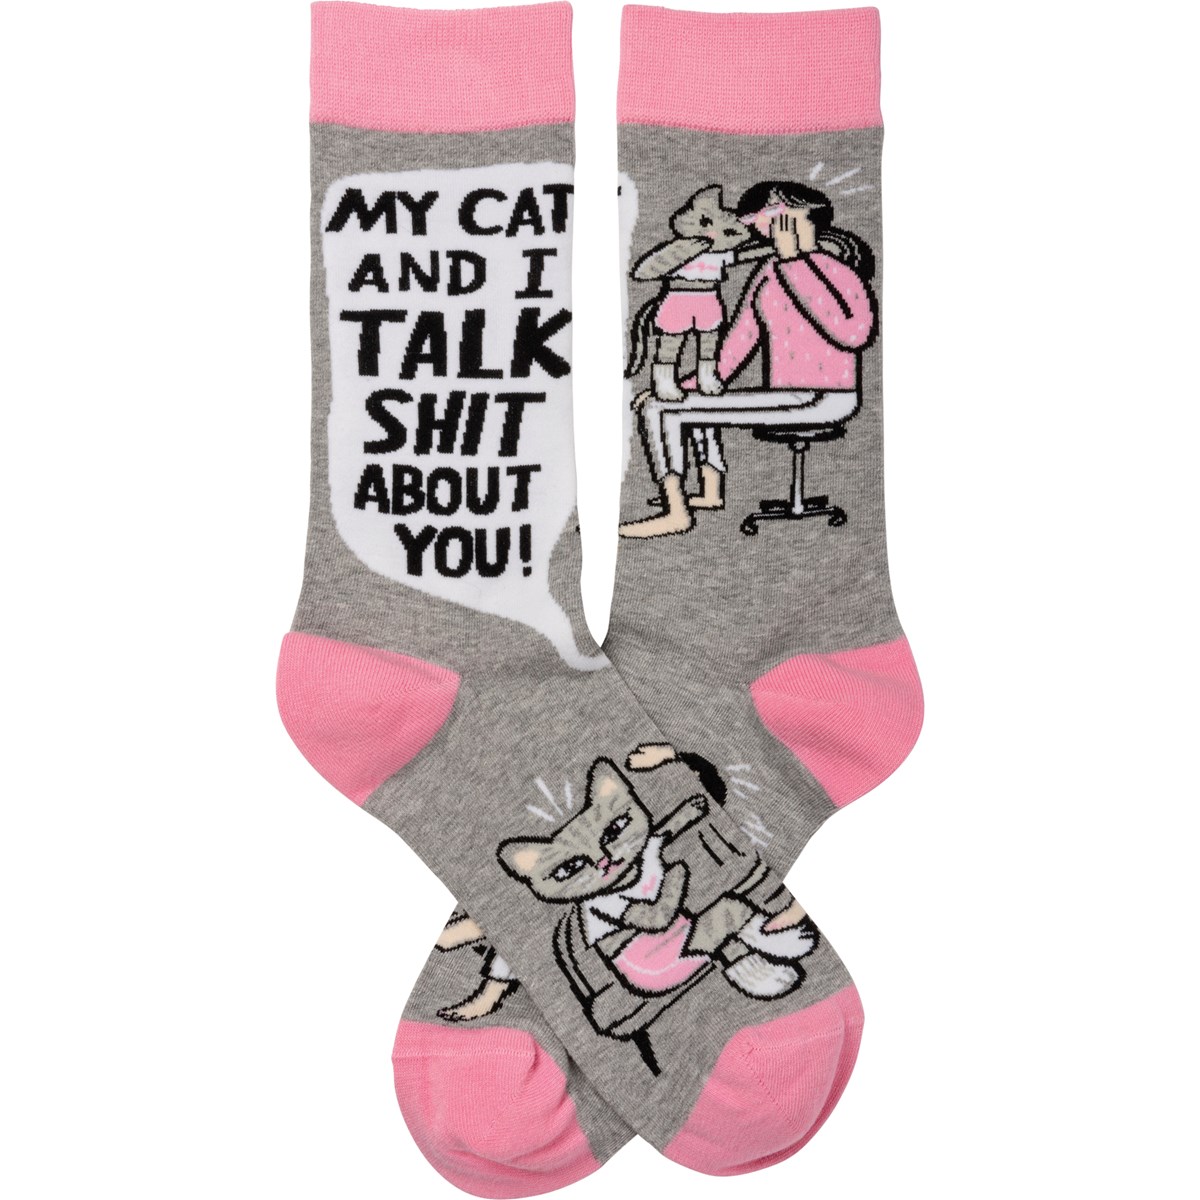 My Cat And I Talk About You Socks - Cotton, Nylon, Spandex